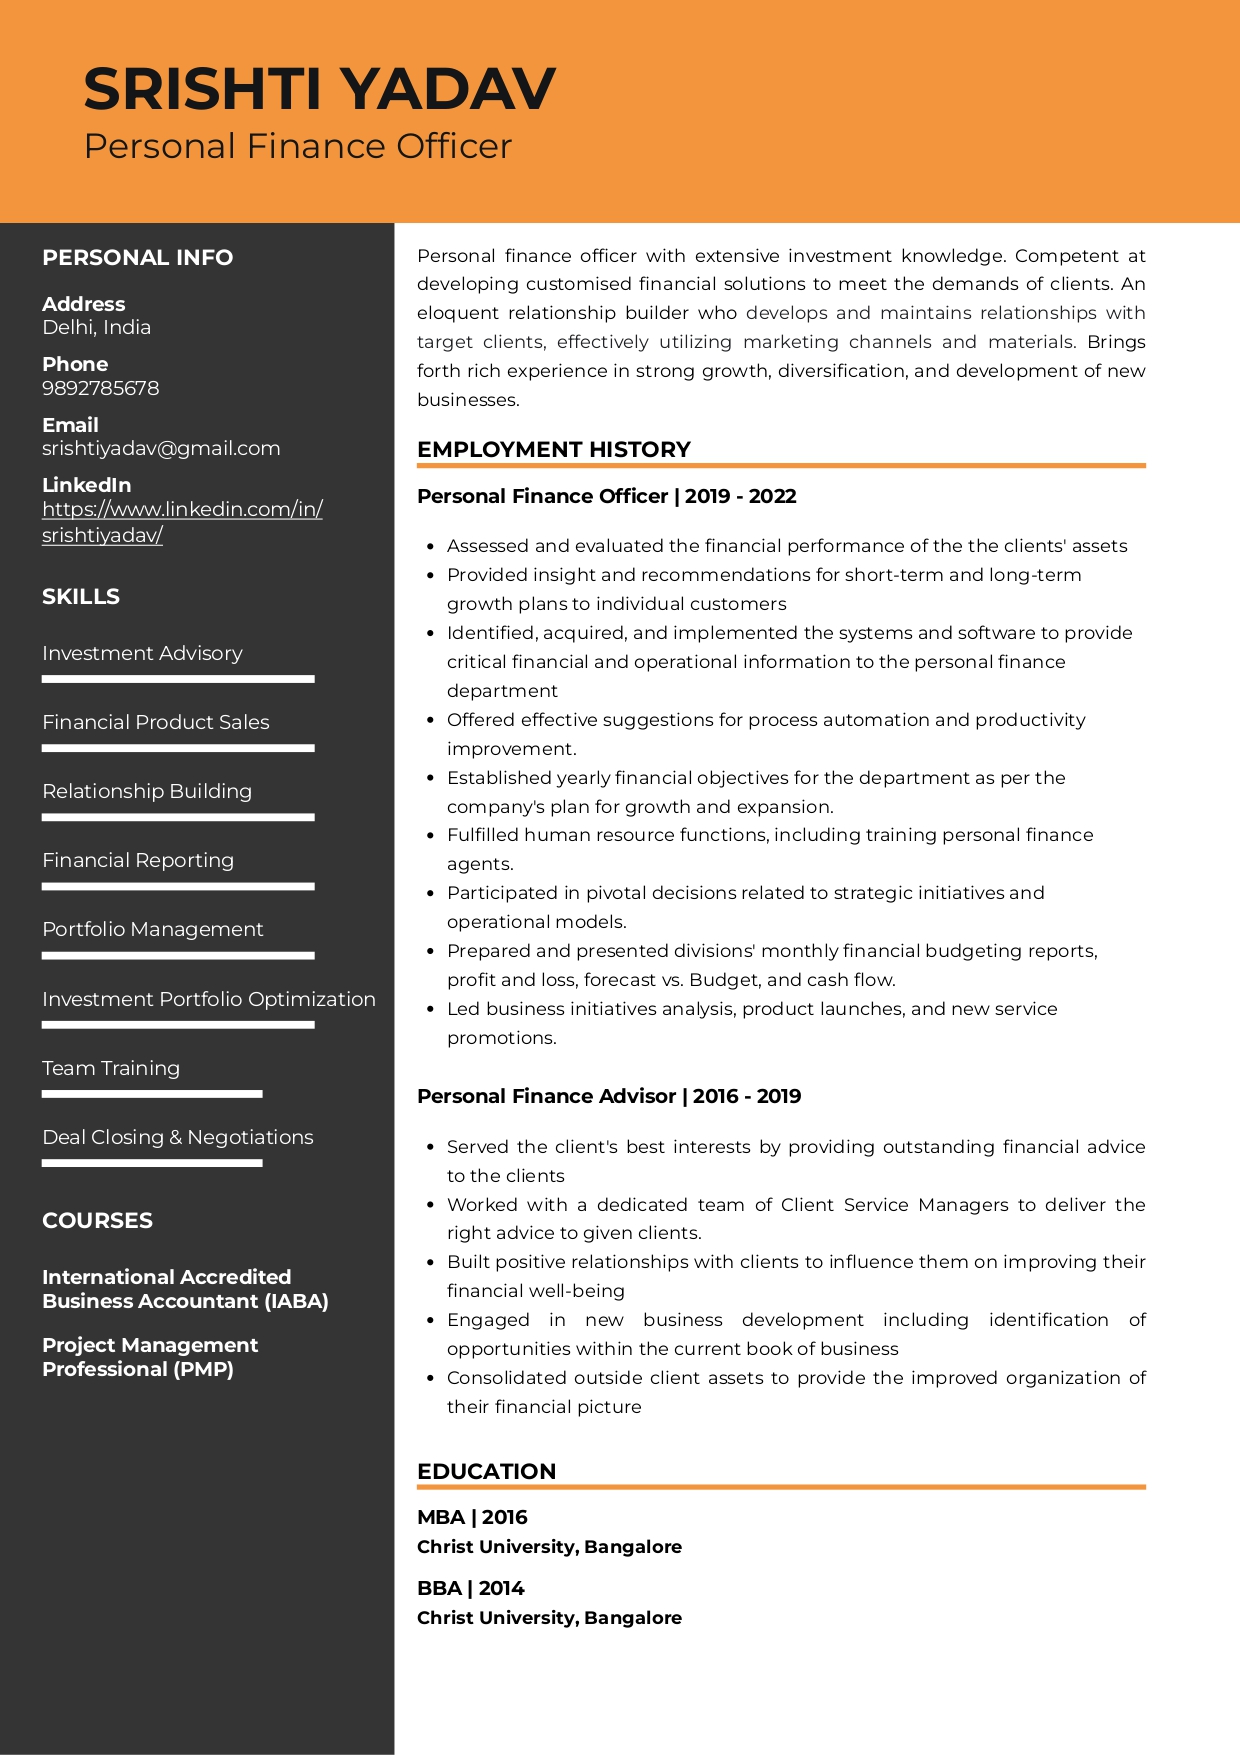 Sample Resume of Personal Finance Officer | Free Resume Templates & Samples on Resumod.co